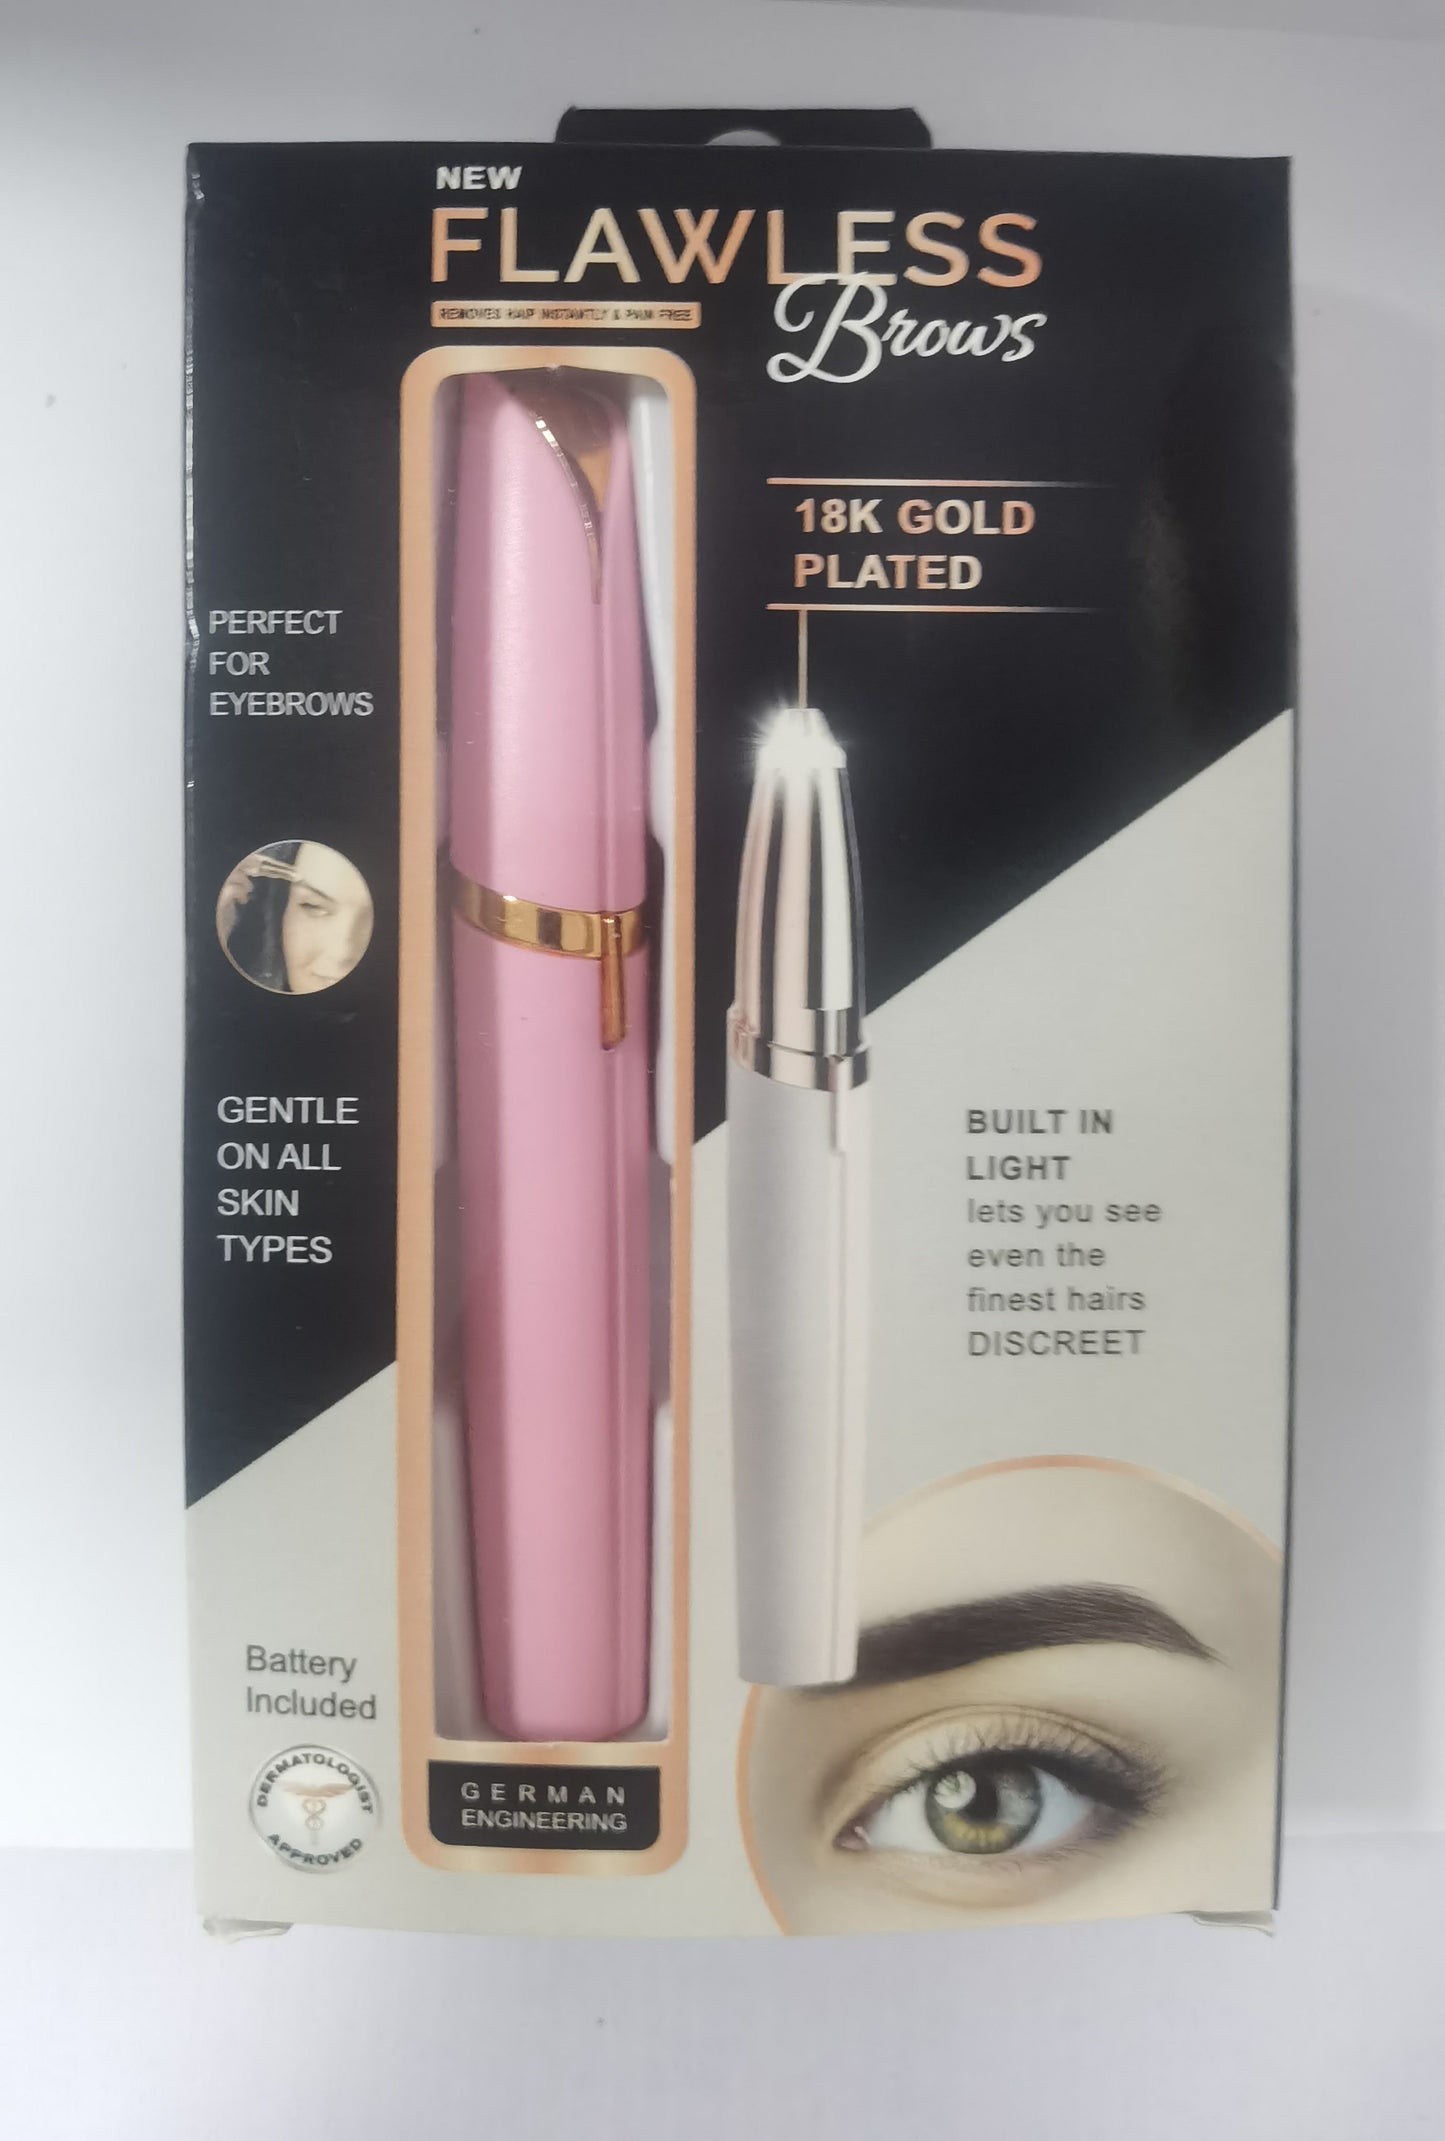 HEART OF LOVE Mini Electric Eyebrow Trimmer with LED Light